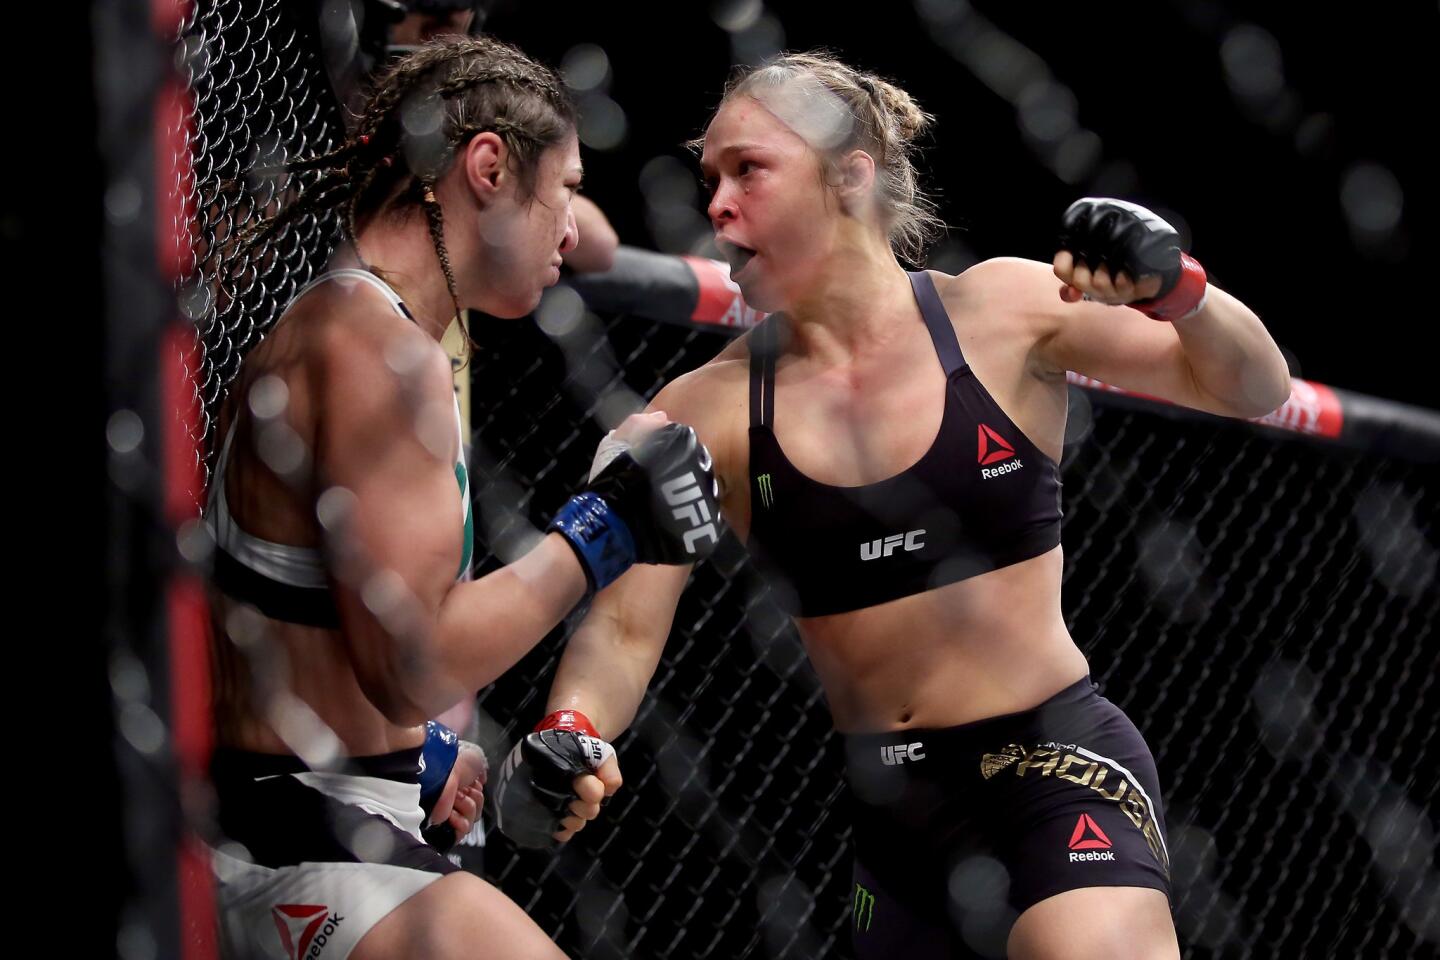 RIO DE JANEIRO, BRAZIL - AUGUST 01: Ronda Rousey of the United States (red) defeats Bethe Correia of Brazi (blue) l in their bantamweight title fight during the UFC 190 Rousey v Correia at HSBC Arena on August 1, 2015 in Rio de Janeiro, Brazil. (Photo by Matthew Stockman/Getty Images) ** OUTS - ELSENT, FPG - OUTS * NM, PH, VA if sourced by CT, LA or MoD **